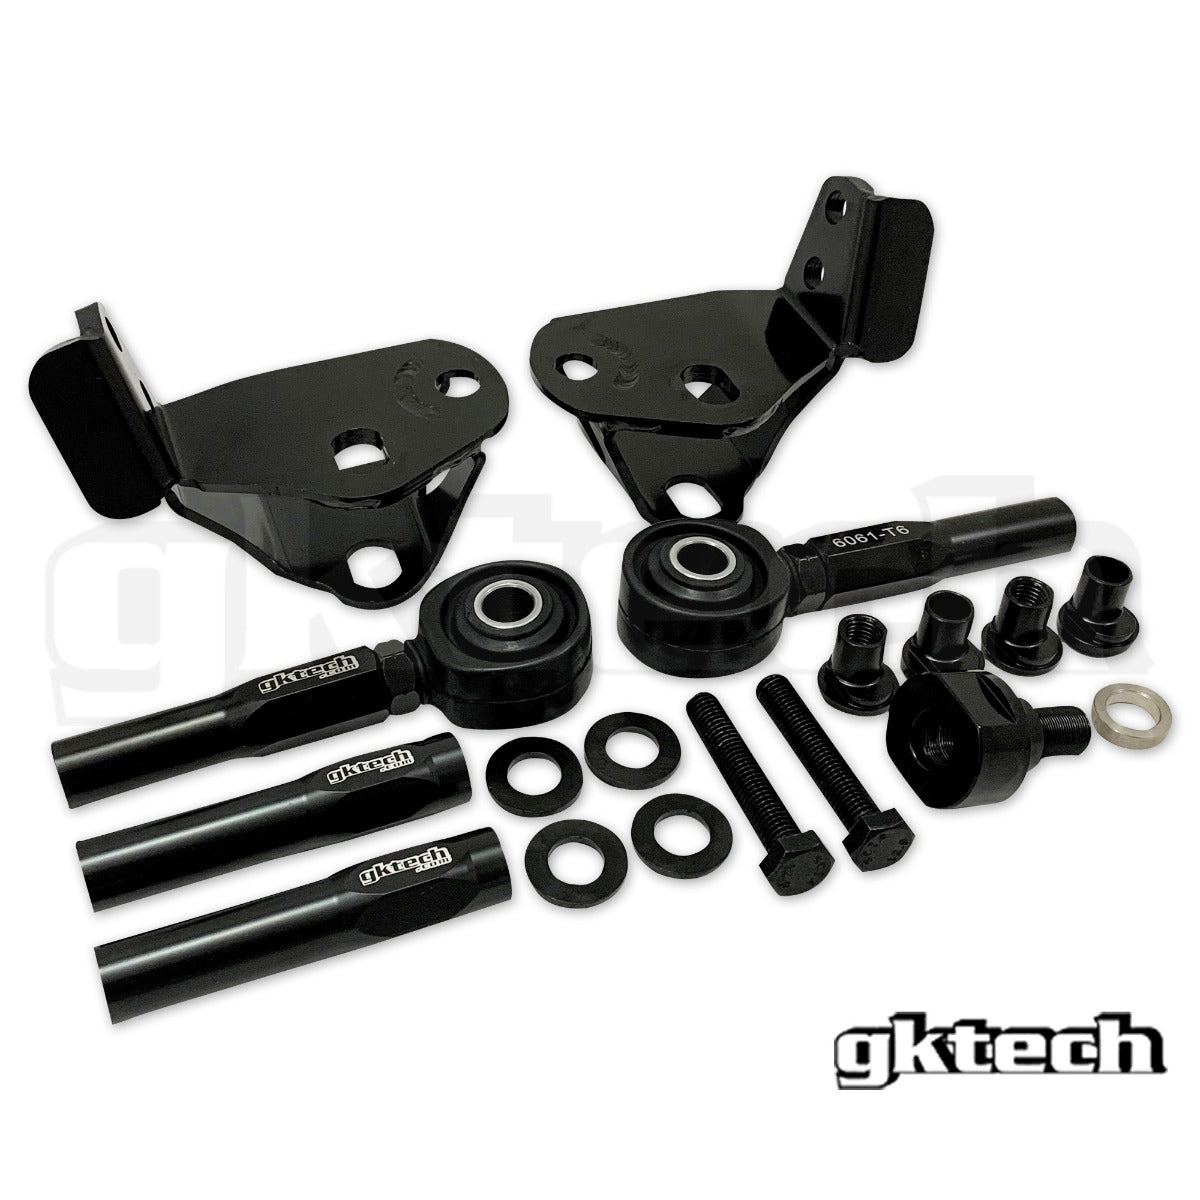 Complete GKTECH V3 Z33 350Z/G35 Angle Kit Viewed from Front - Enhance Steering Performance